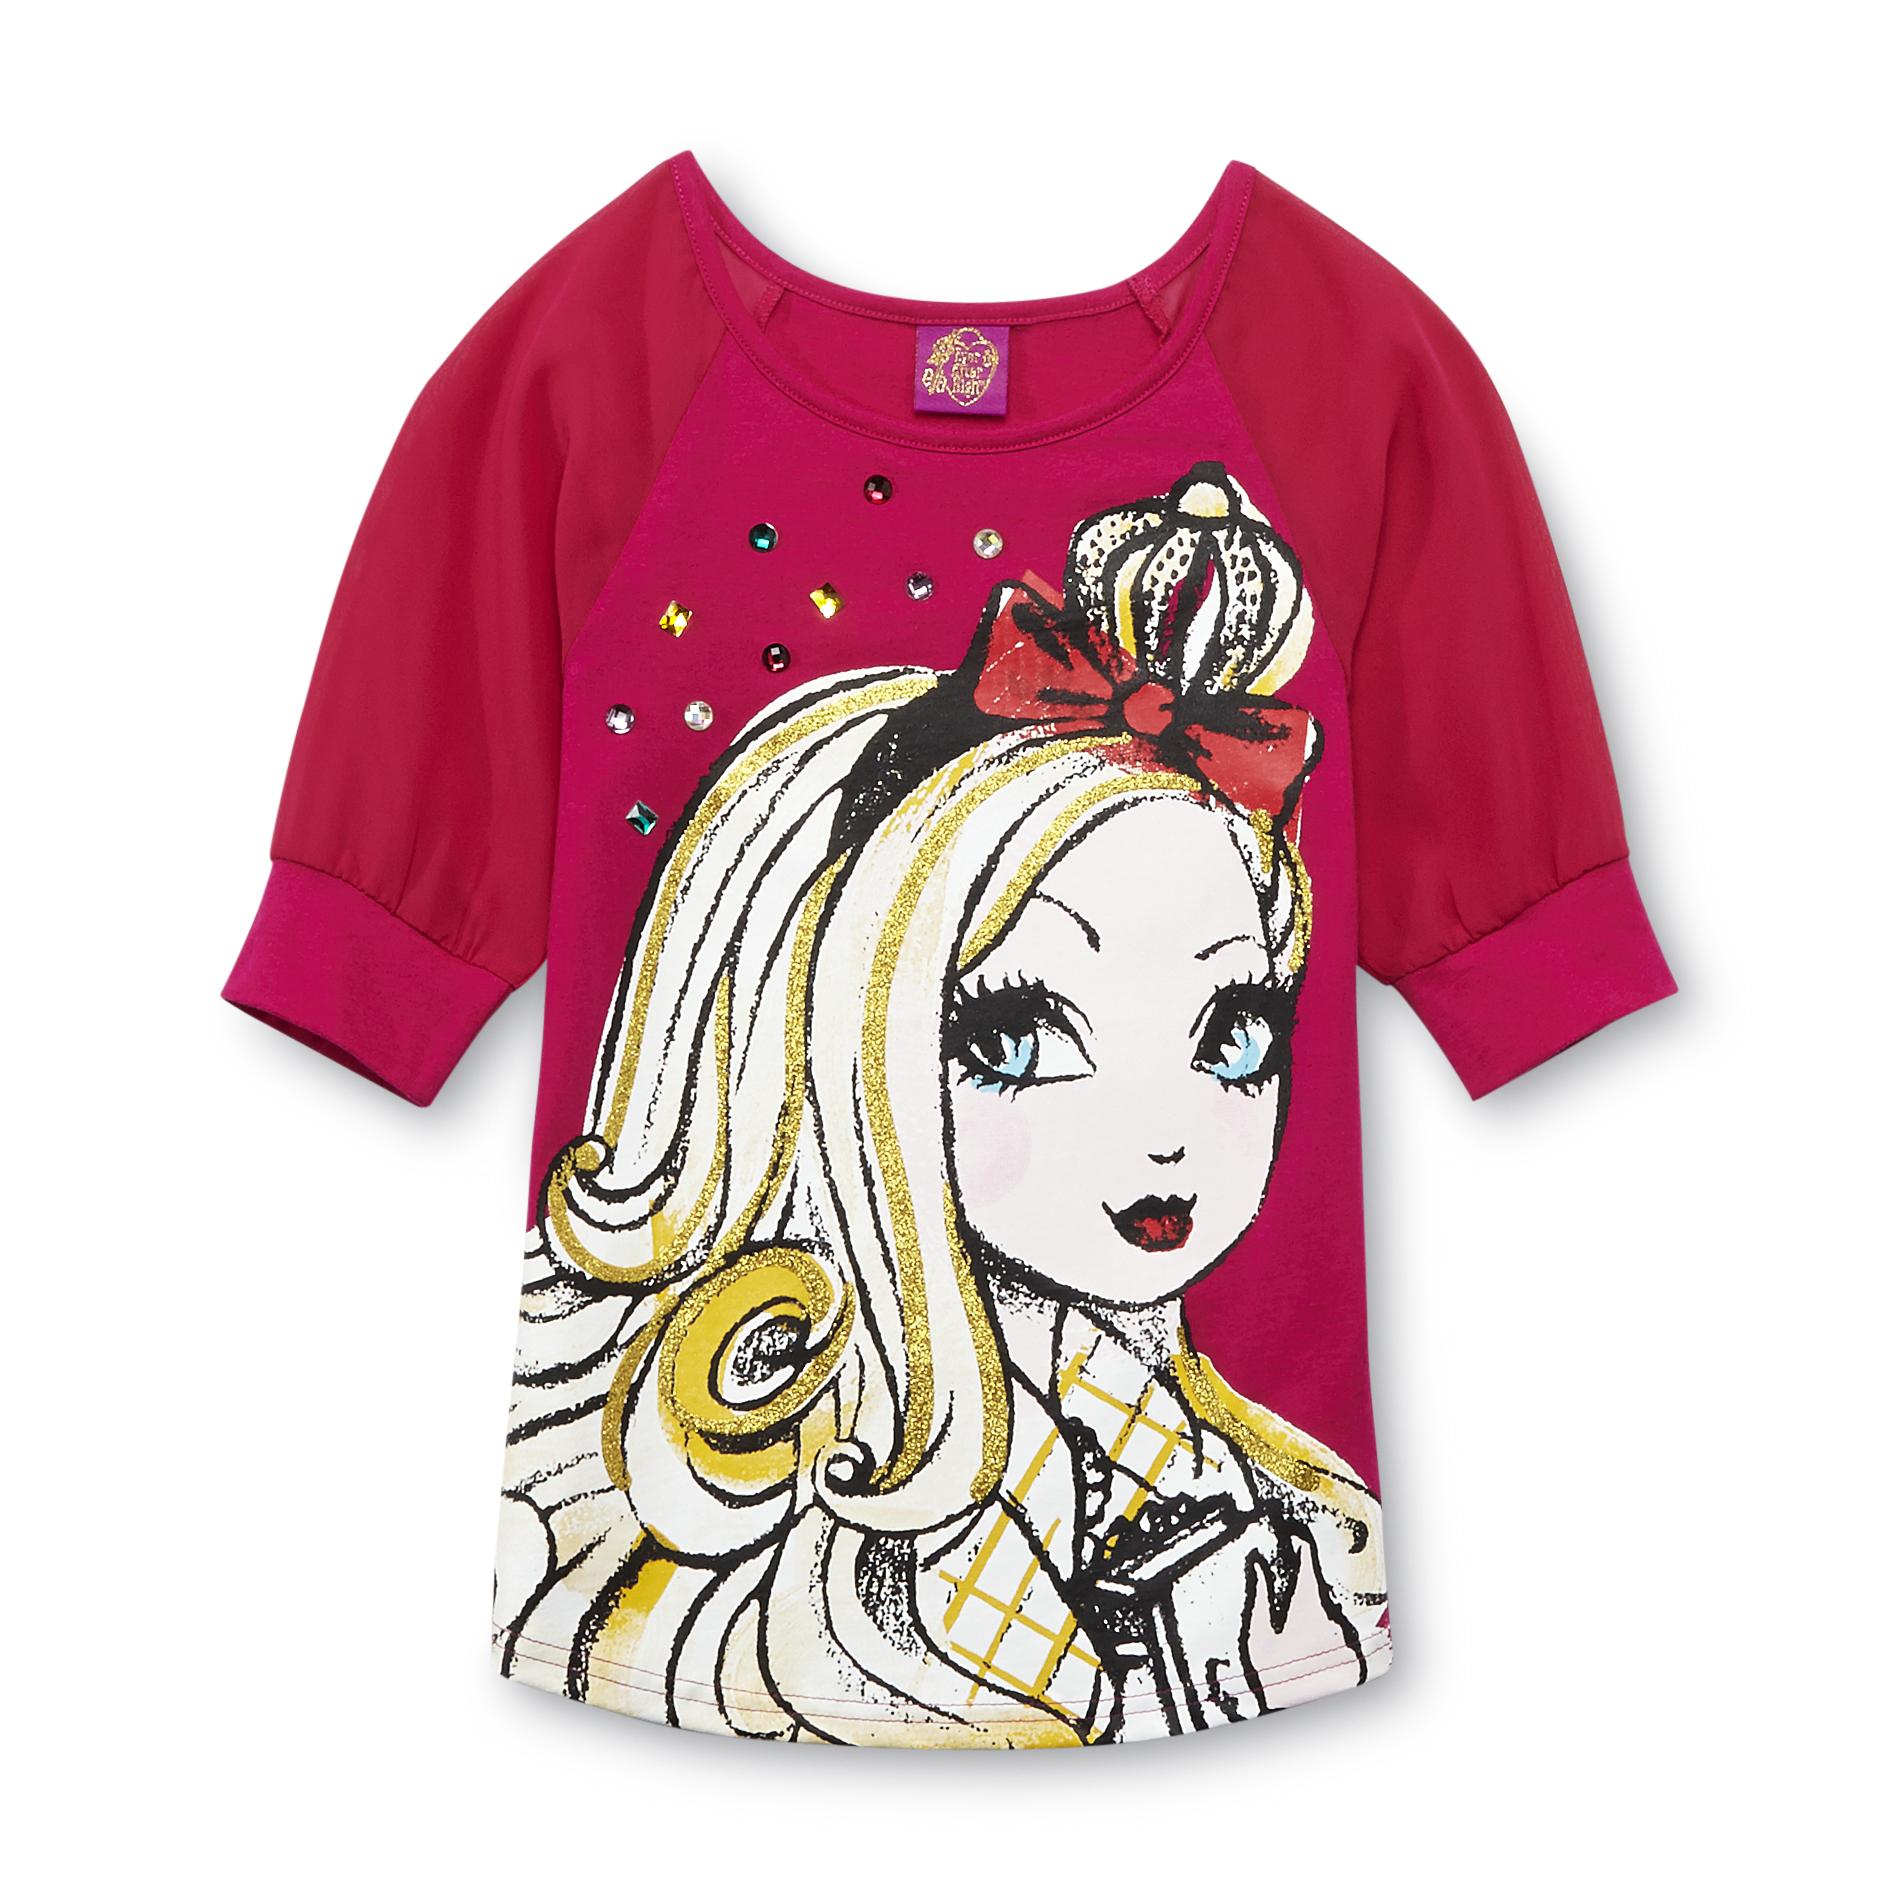 Ever After High Girl's Dolman Top - Apple White